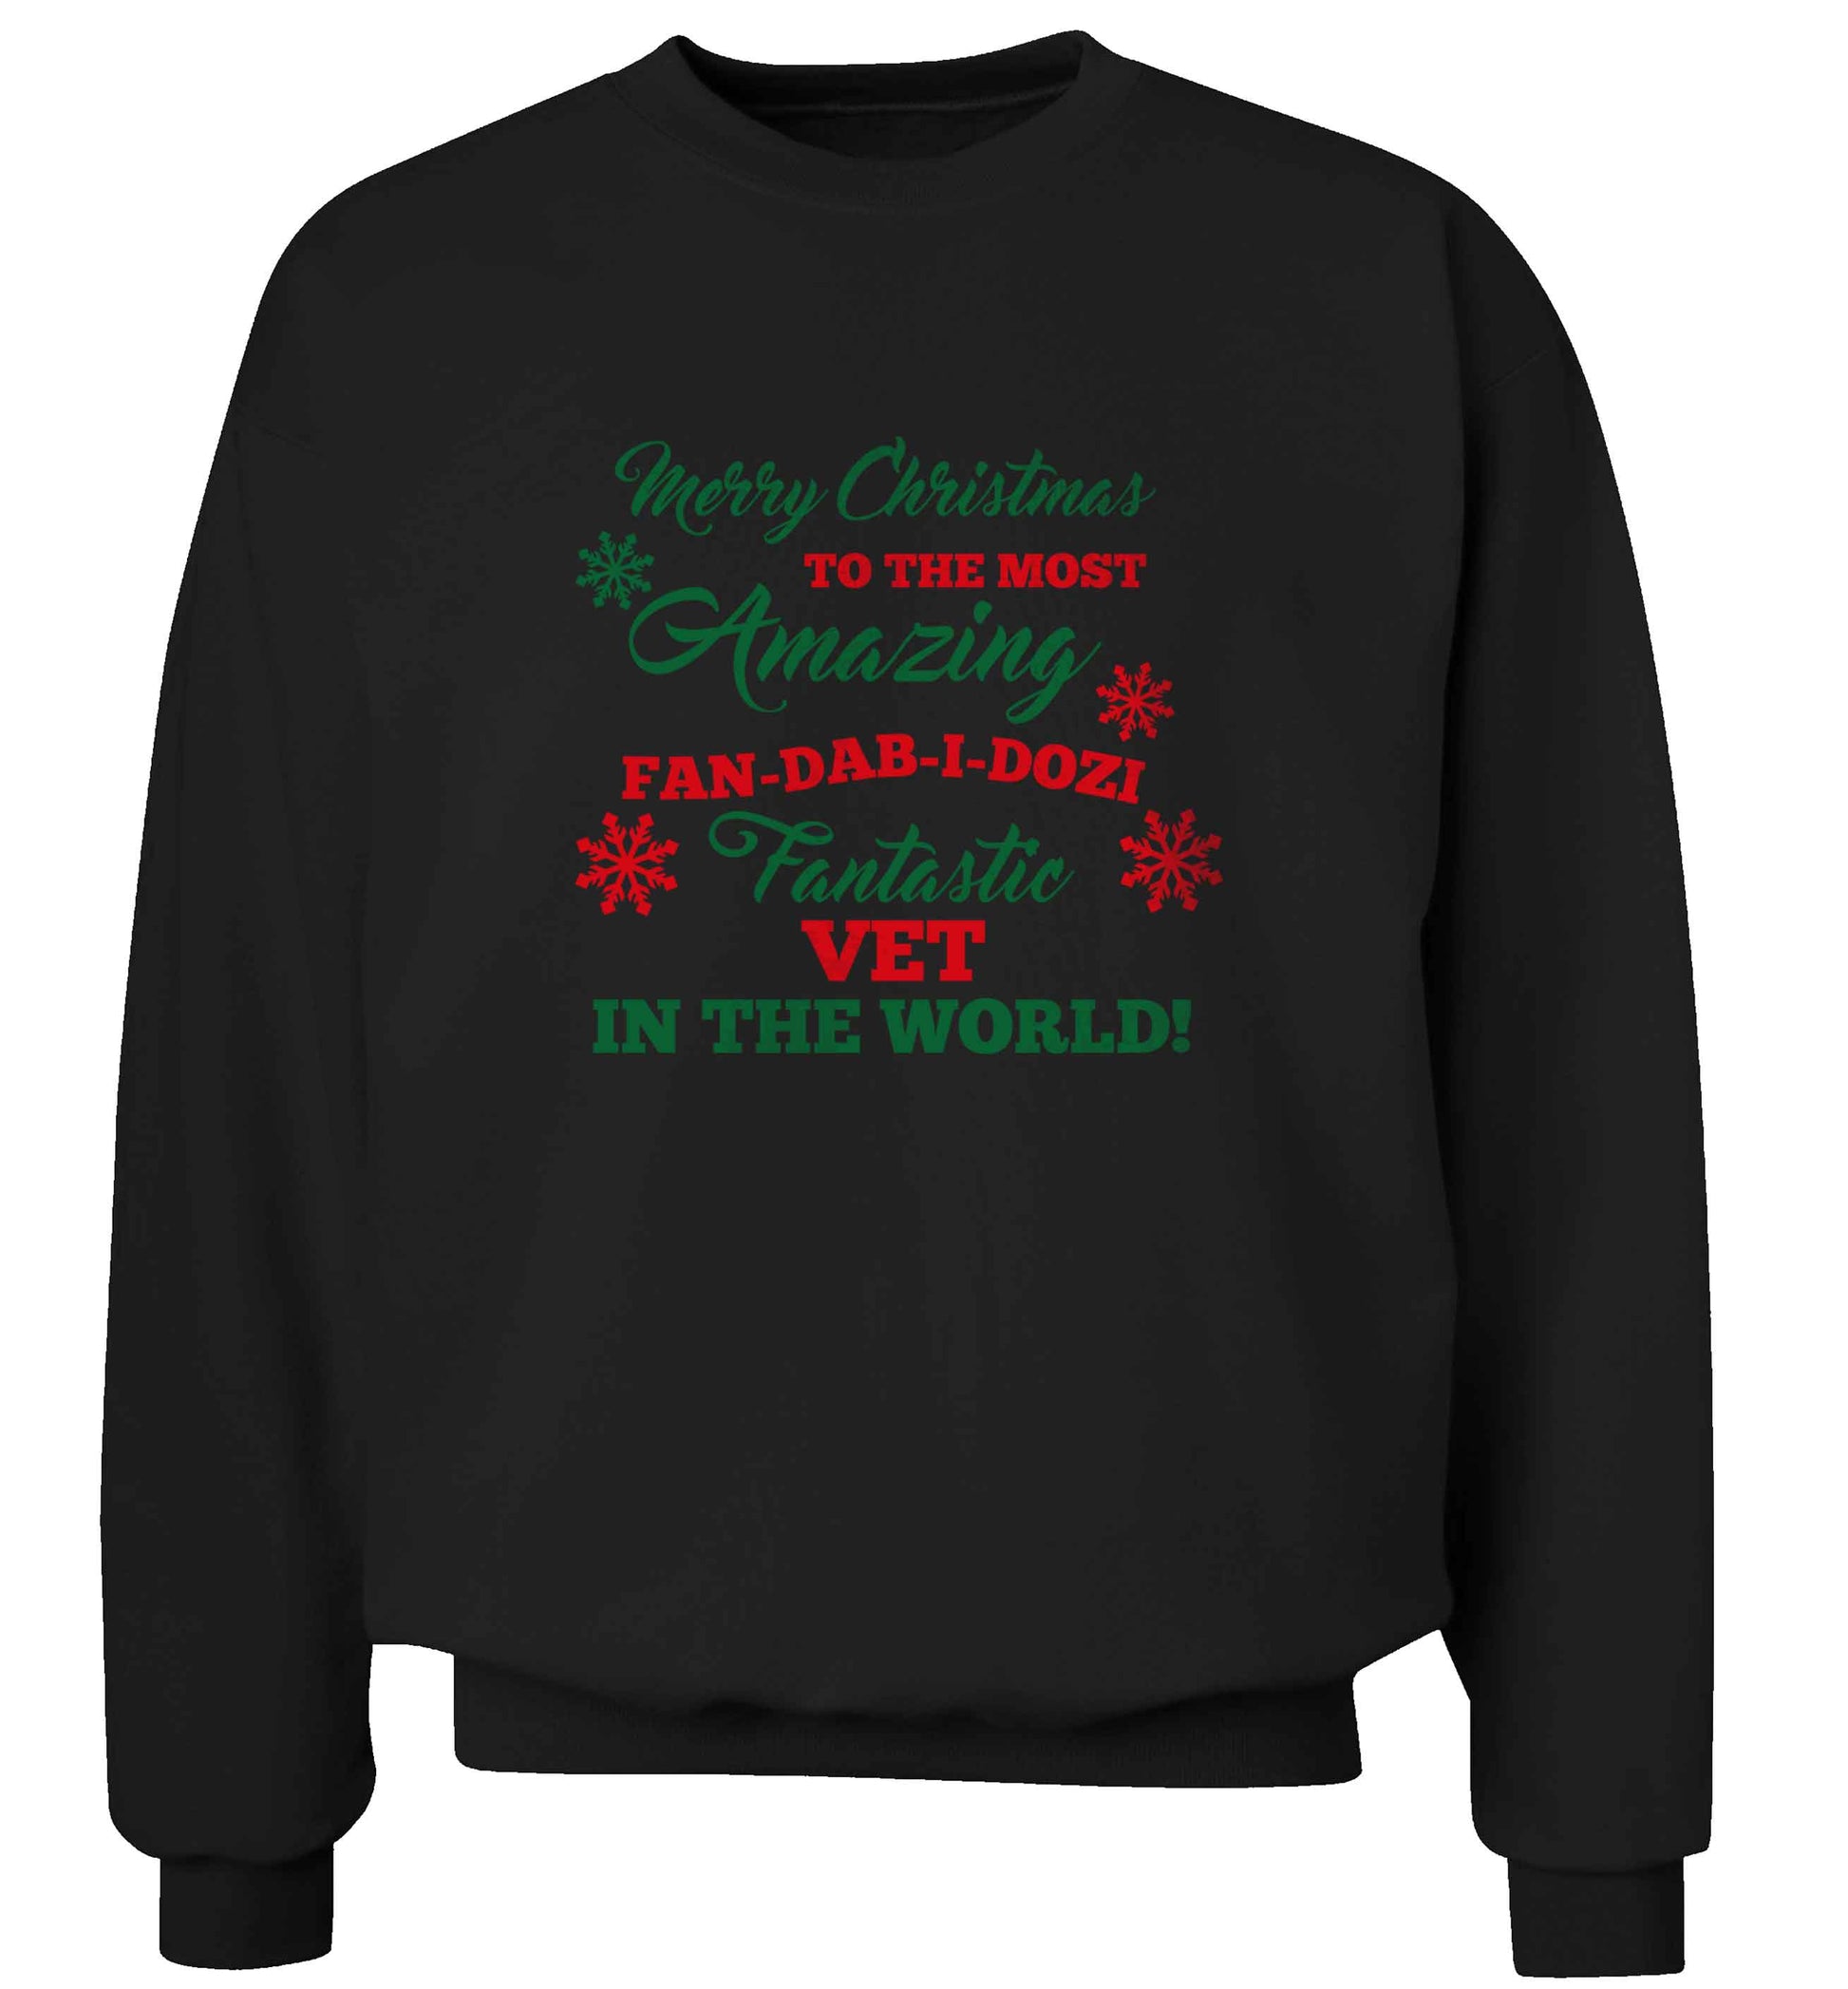 Merry Christmas to the most amazing vet in the world! adult's unisex black sweater 2XL